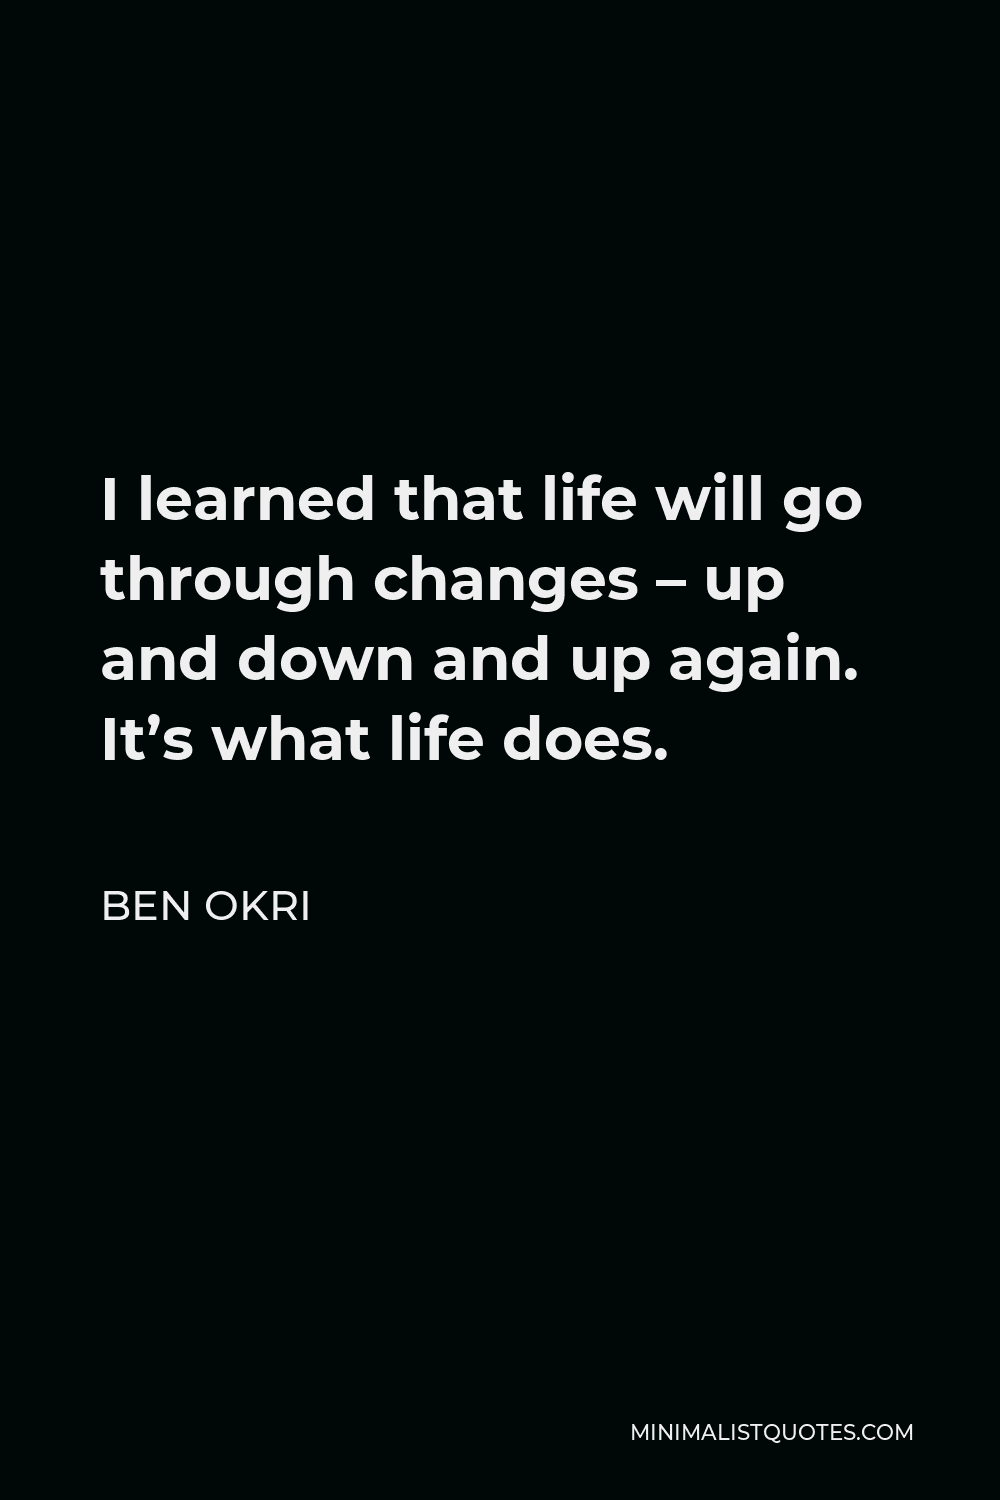 Ben Okri Quote - I learned that life will go through changes – up and down and up again. It’s what life does.